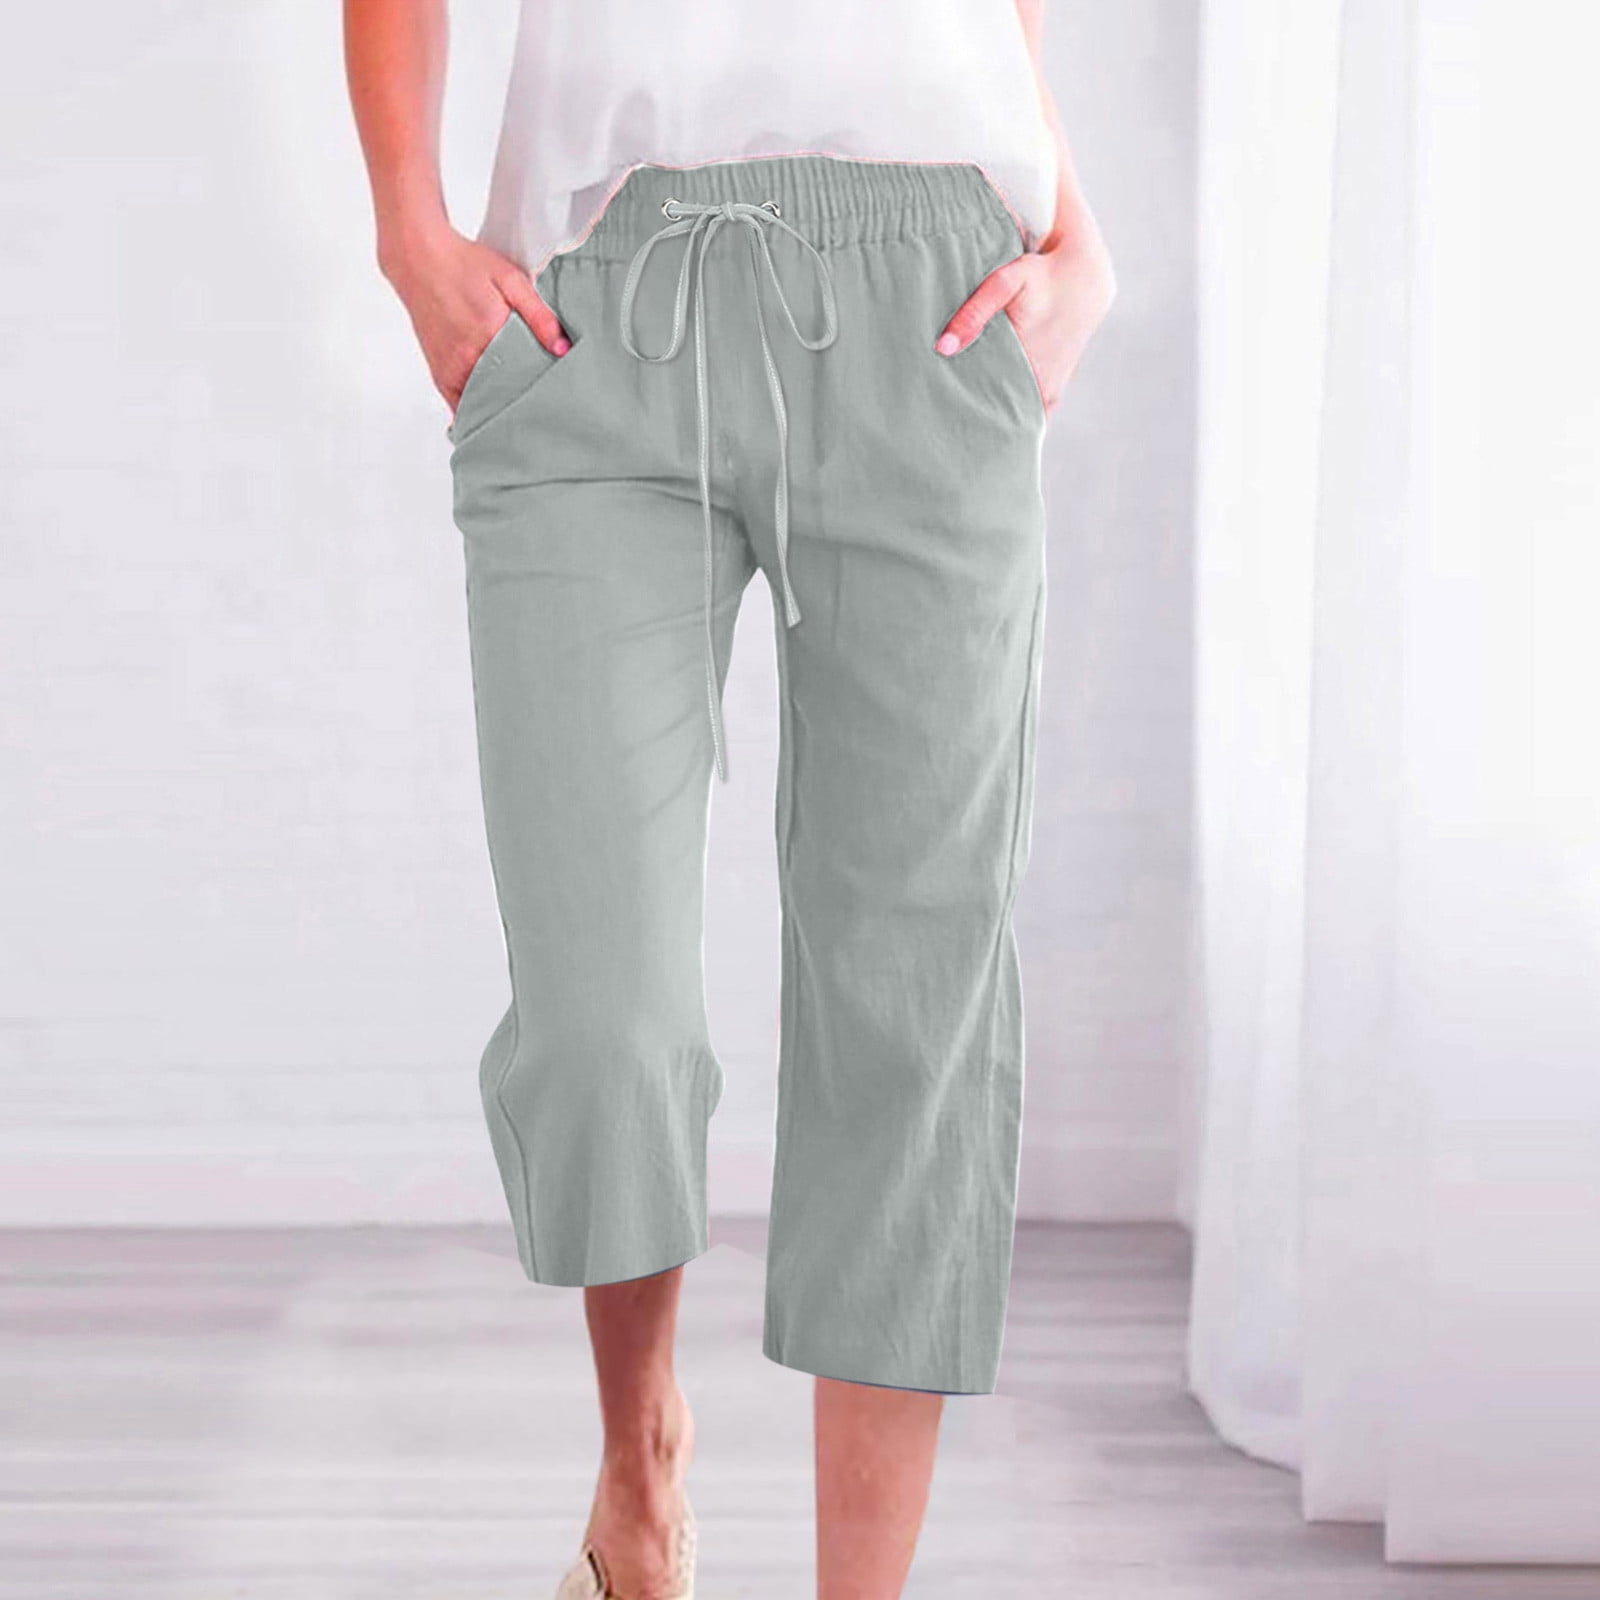 New Trends & Styles,POROPL Elastic Waist Casual Solid Large Pocket Cotton  Linen Straight Pants Womens Capri Pants Clearance Green Size 4 - Walmart.com